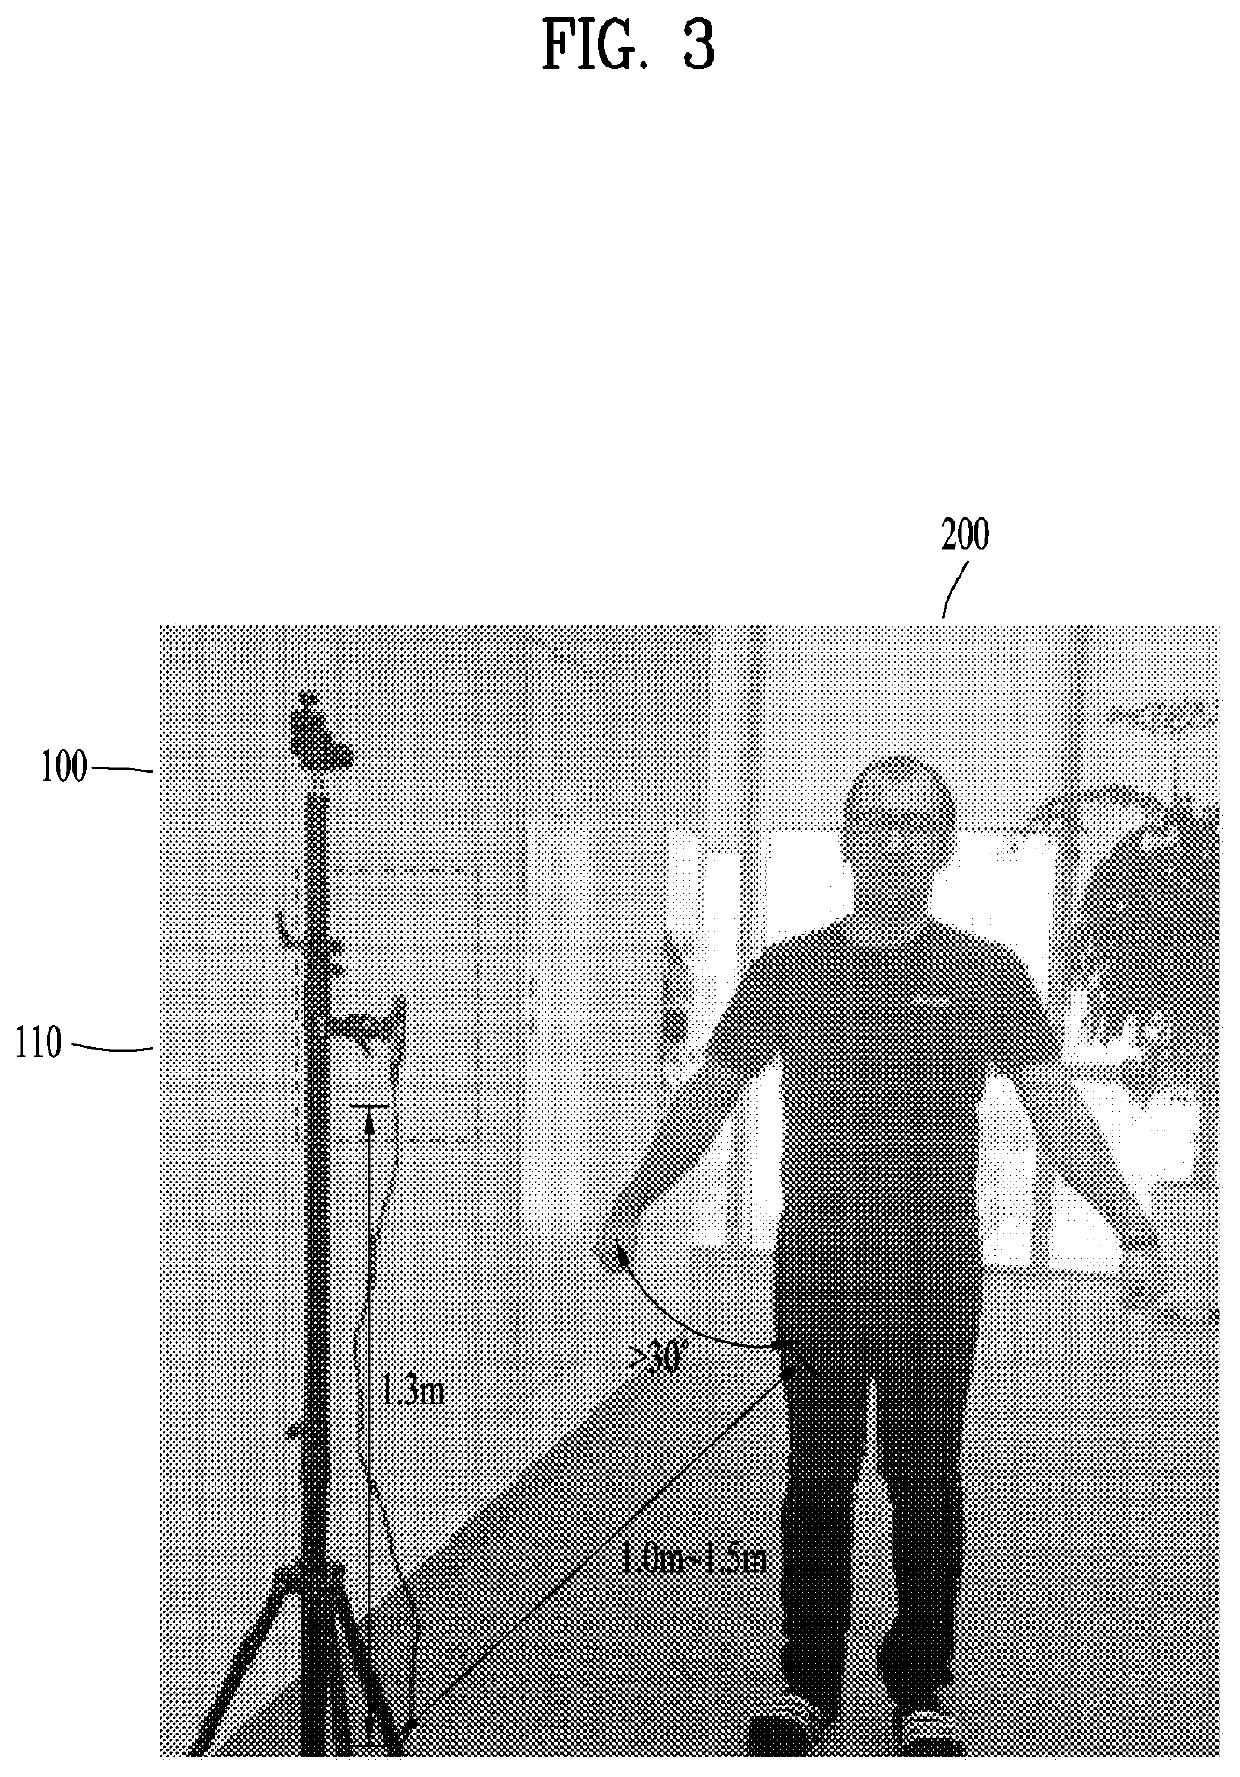 Body measurement device and method for controlling the same